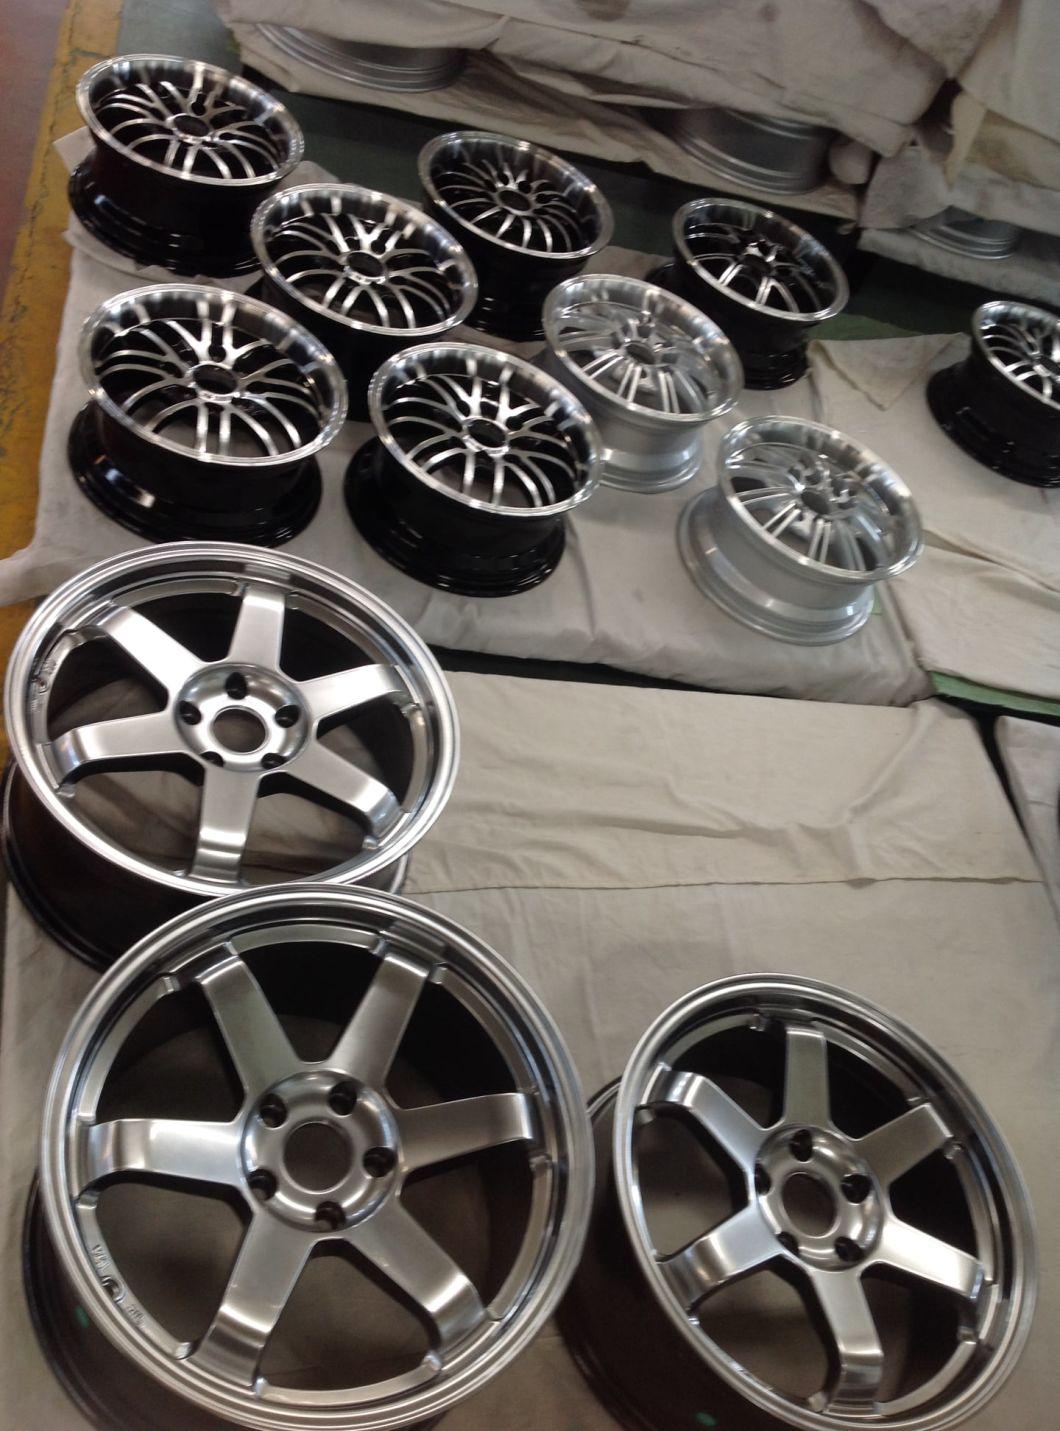 Custom Forged Wheels 22 23 24 Inch Rims Polished Chrome Wheel for Mercedes GLS for Range Rover